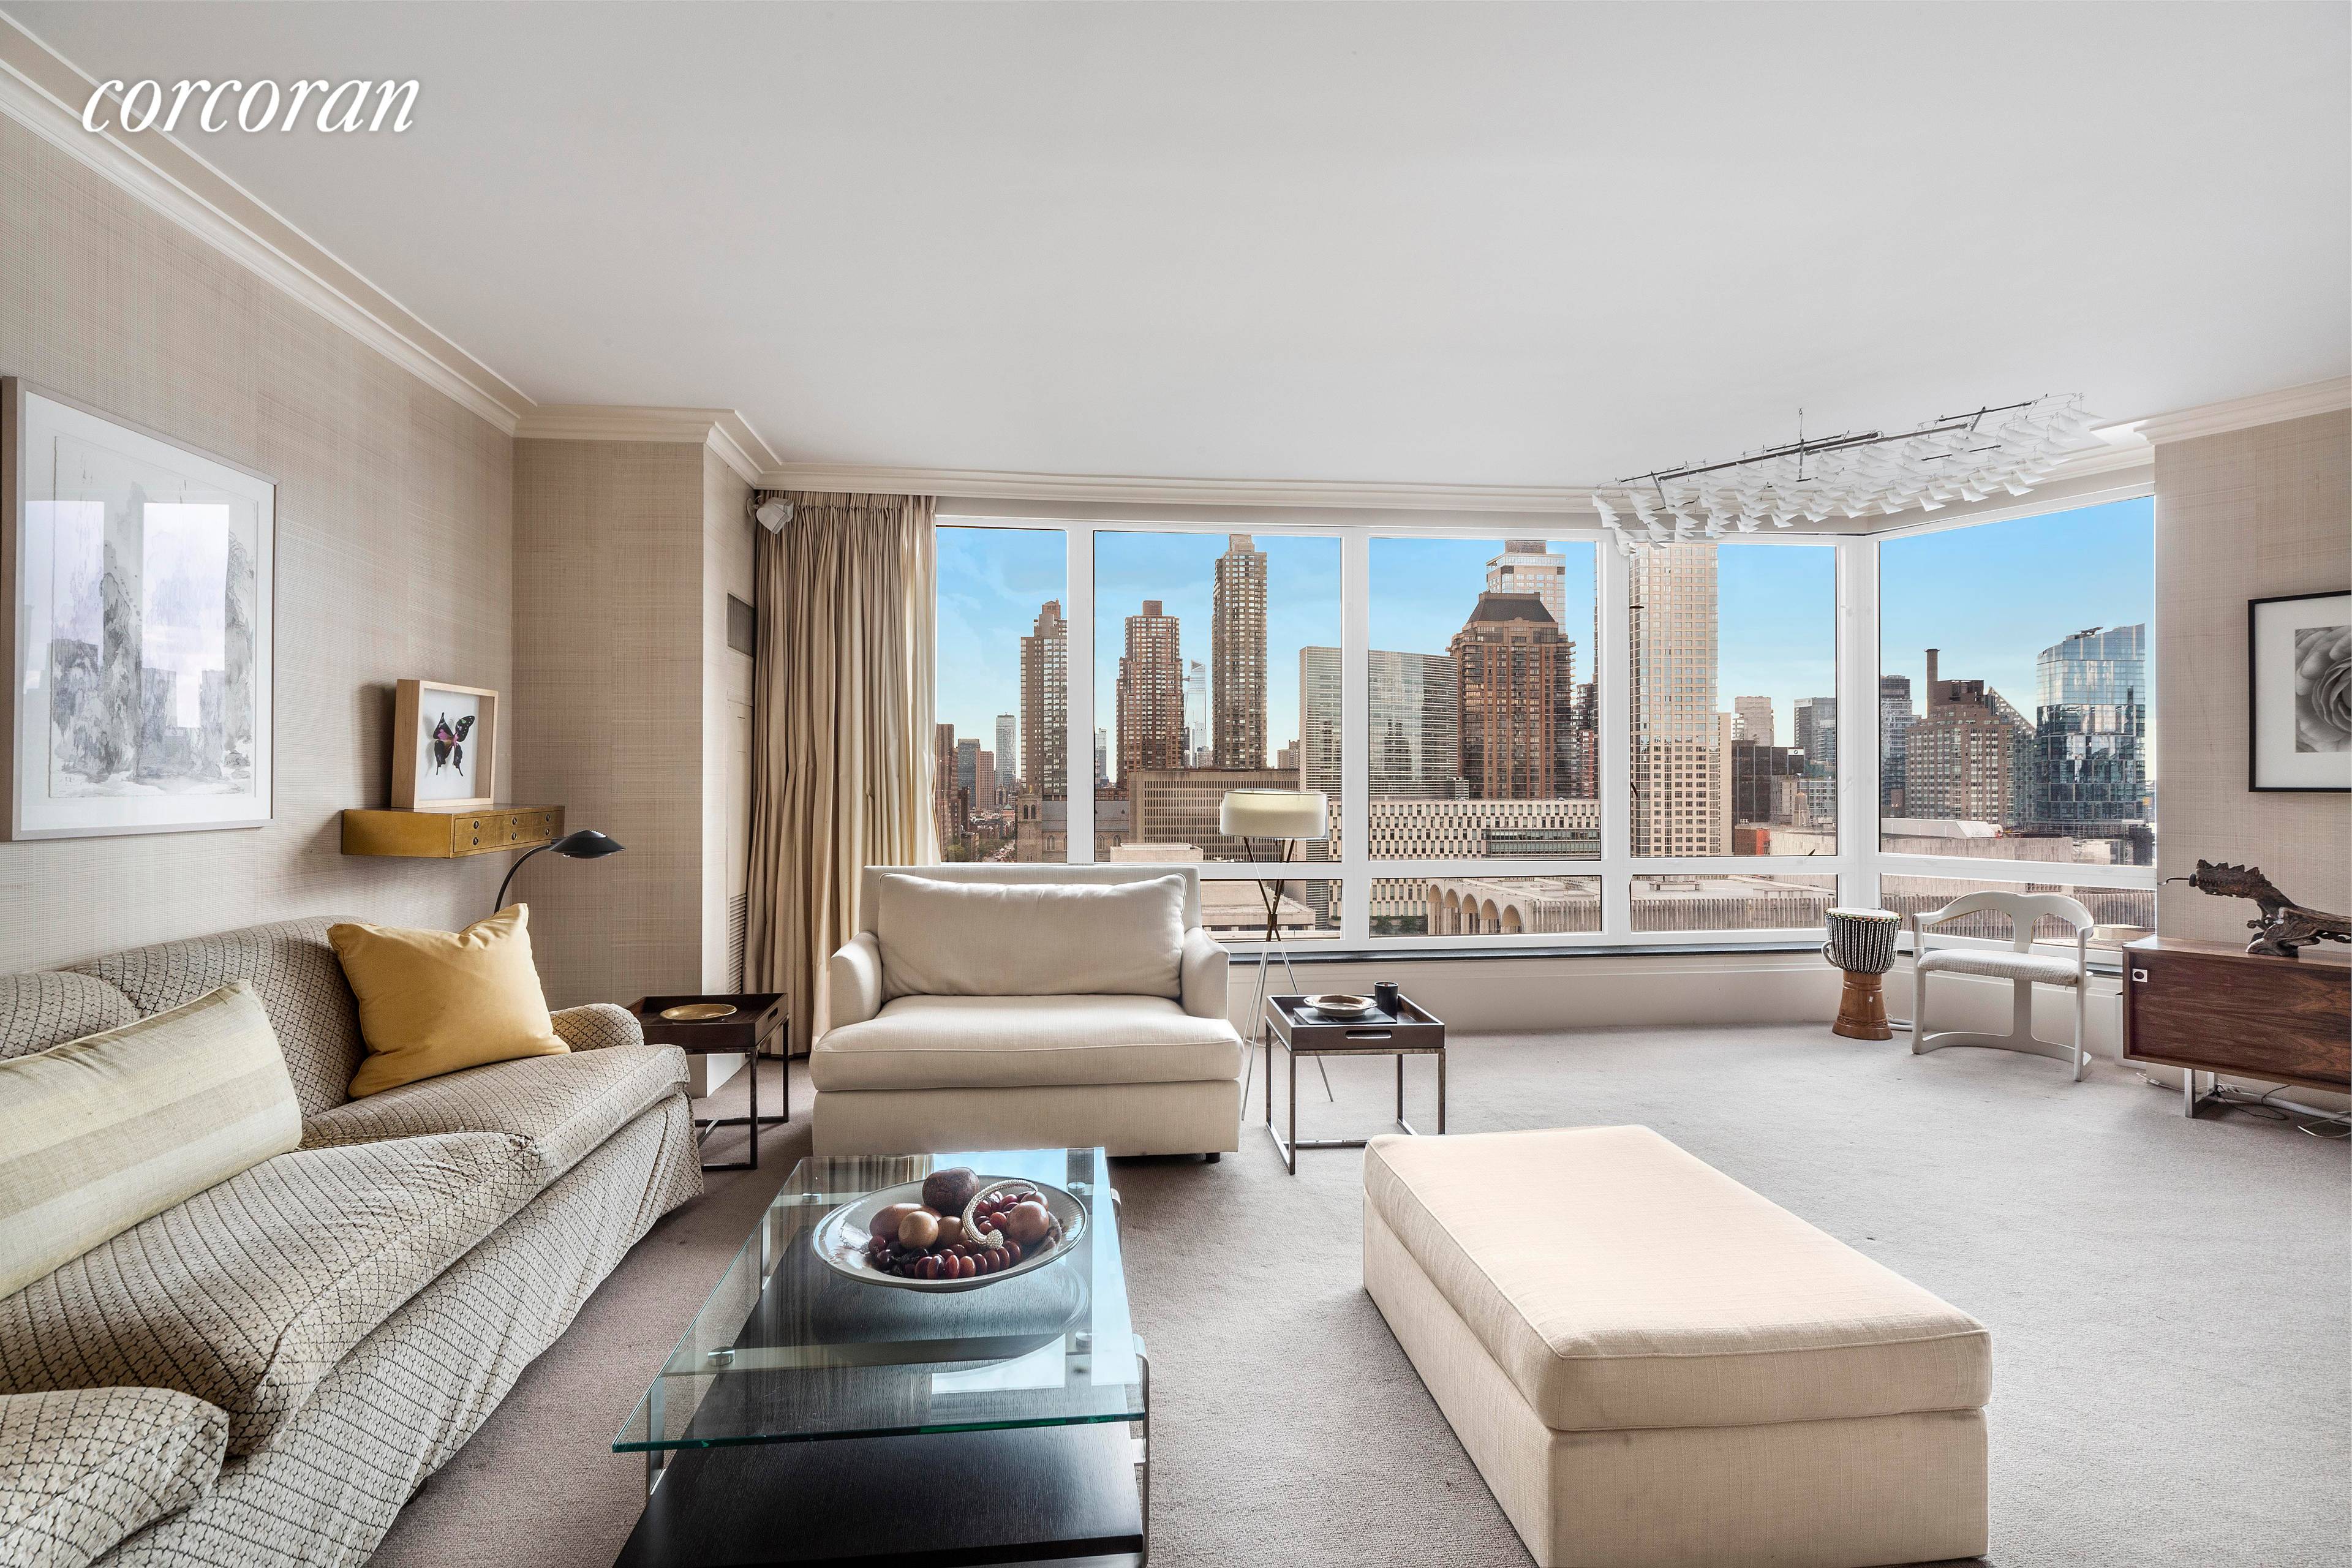 This spacious high floor condo at One Lincoln Square has sweeping south, west and east views directly over Lincoln Center and beyond over the Manhattan skyline.